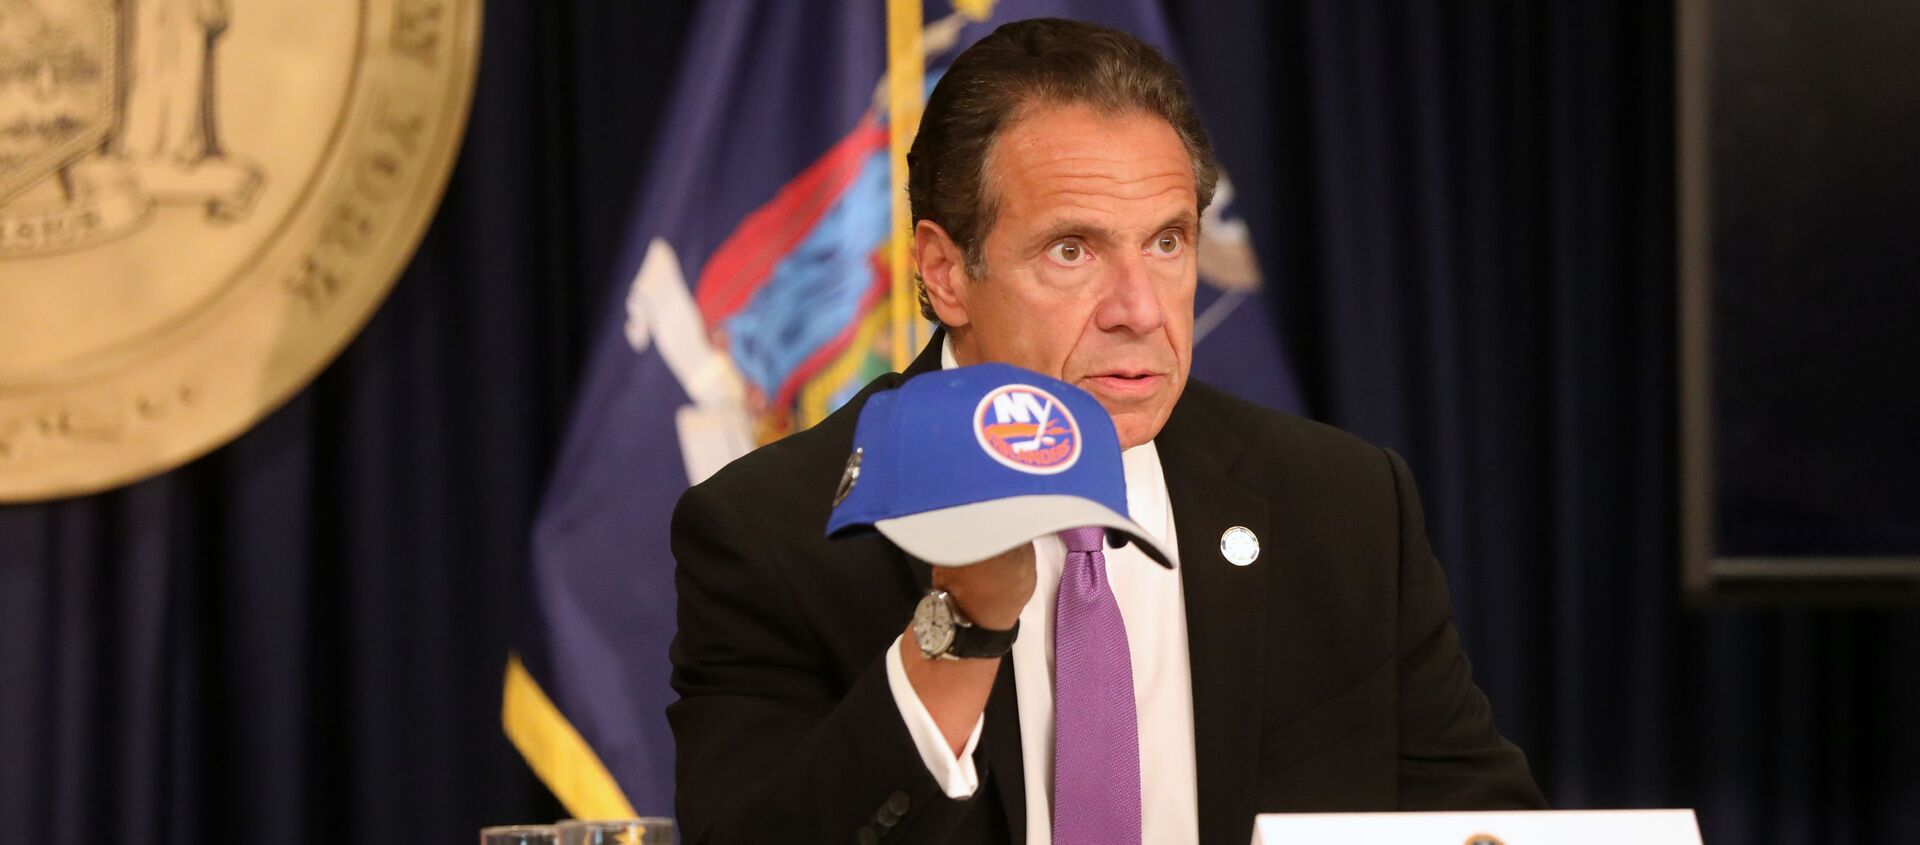 SEPTEMBER 08: New York state Gov. Andrew Cuomo holds an NHL New York Islanders hat at a news conference on September 08, 2020 in New York City. Cuomo, though easing restrictions on casinos and malls throughout the state, has declined to do so for indoor dining in restaurants in New York City despite pressure from business owners, citing struggles by the city to enforce the state's previous orders. - Sputnik International, 1920, 12.02.2021